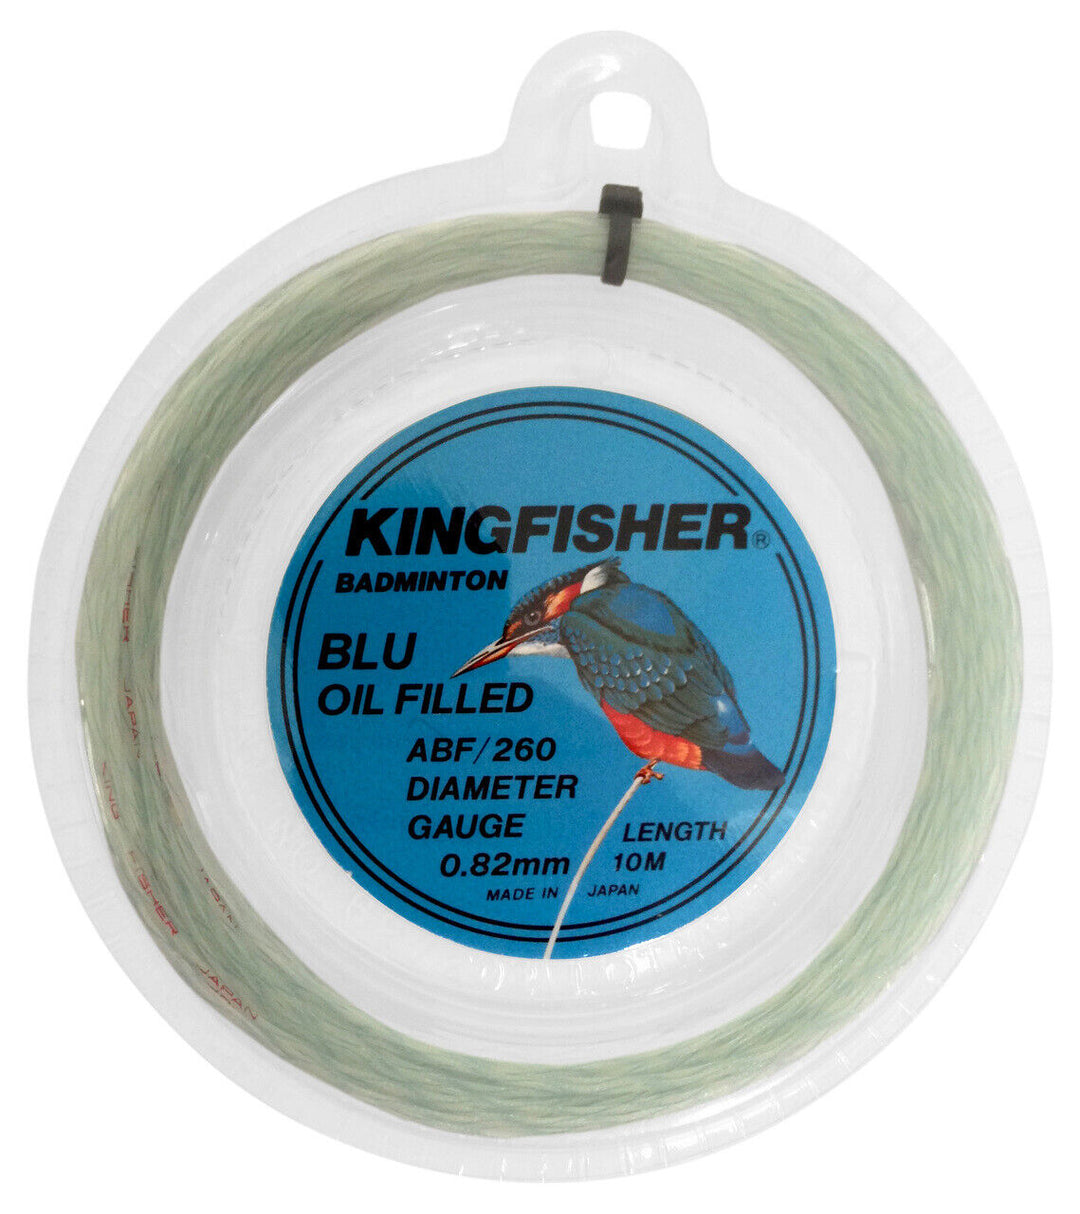 Kingfisher Oil Filled